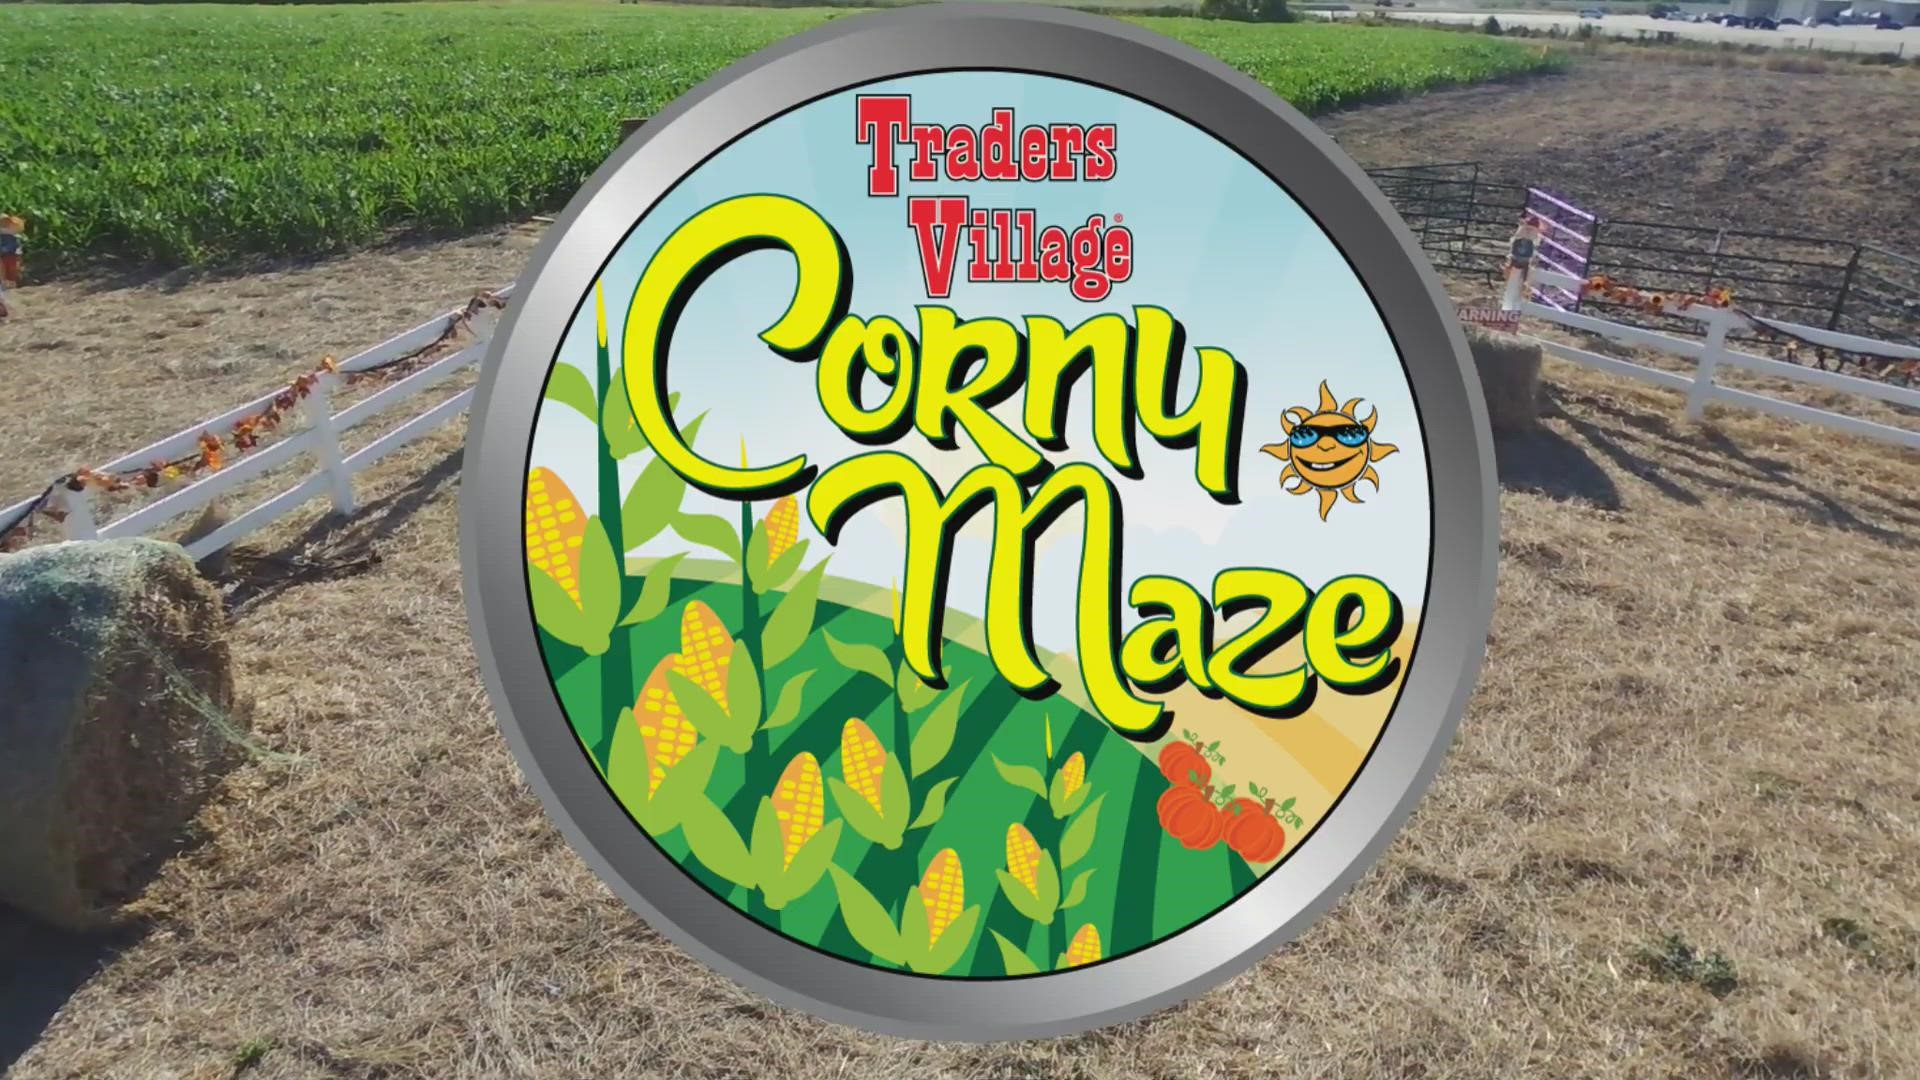 A 10-acre corn maze, the Corny Maze, is now open at Traders Village until late November.